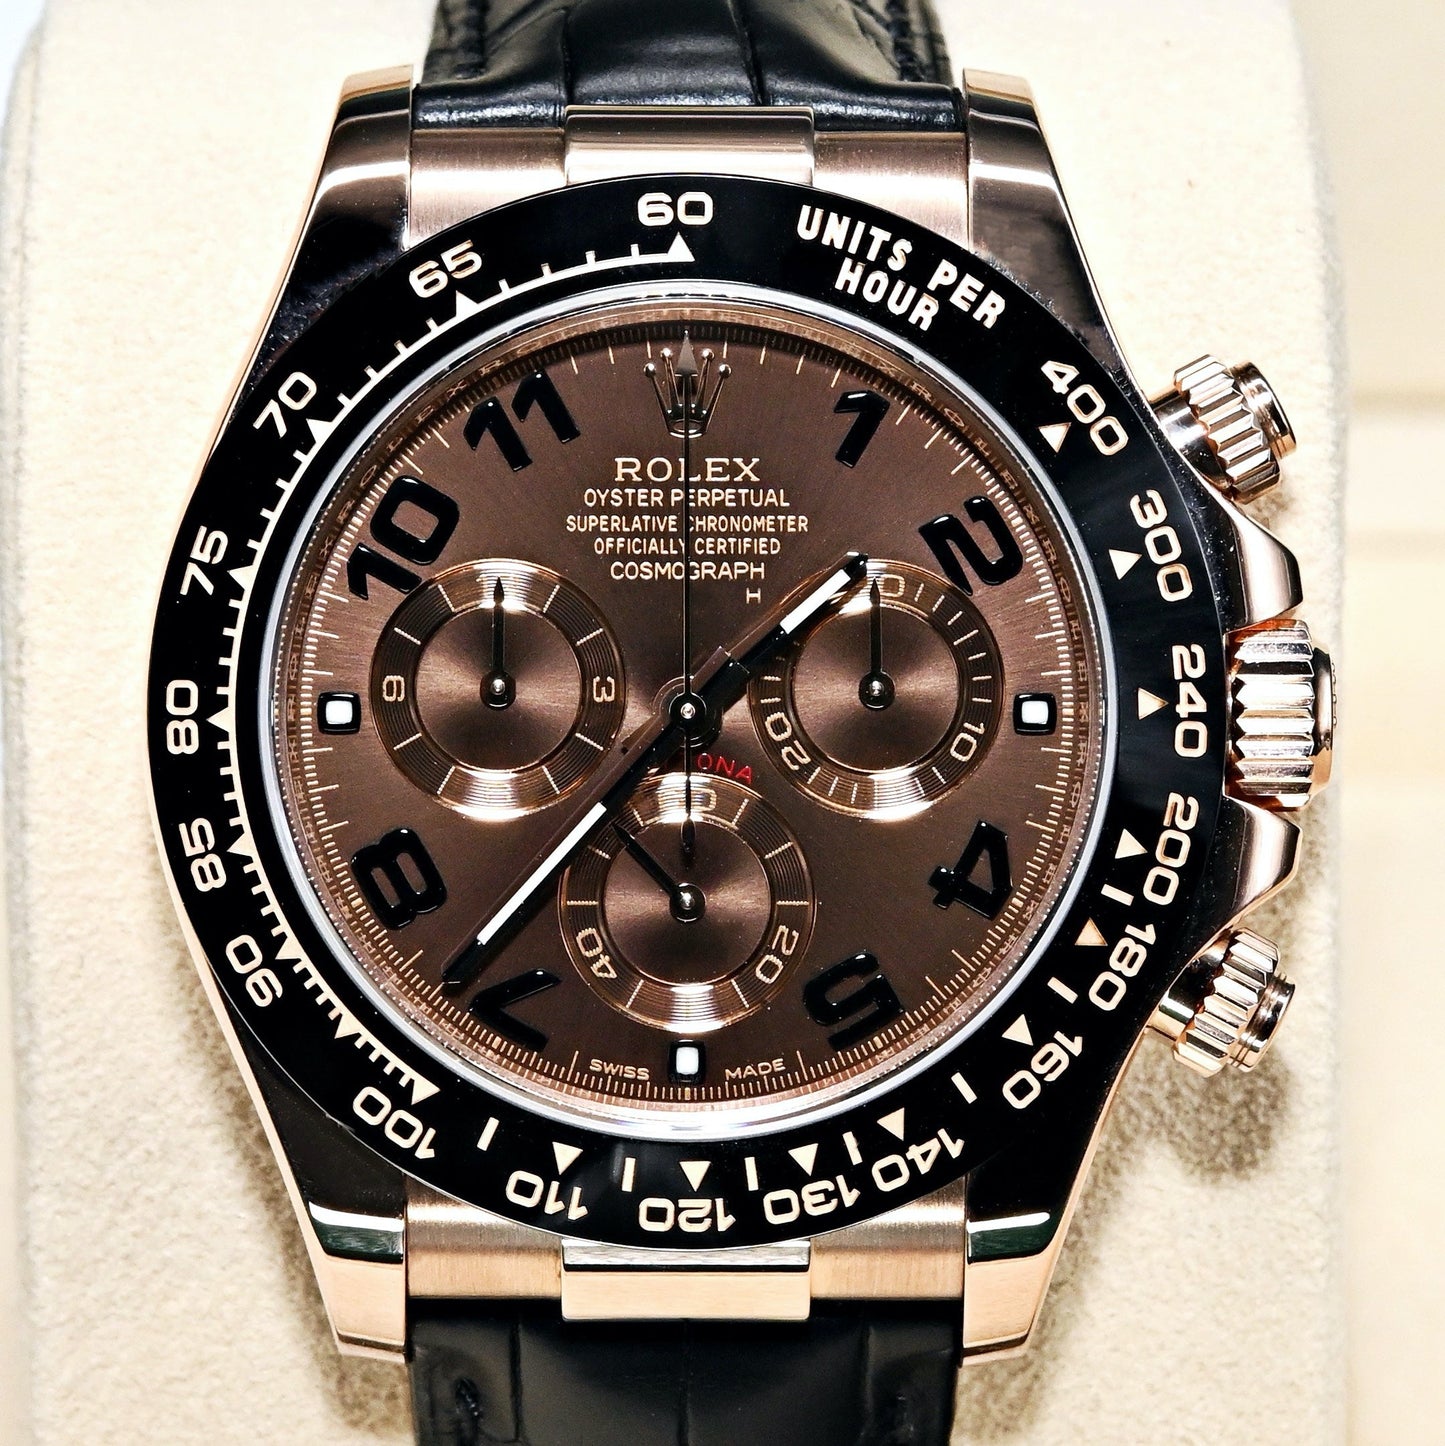 [Pre-Owned Watch] Rolex Cosmograph Daytona 40mm 116515LN Black Dial (Leather Strap) (Out of Production Numerial Hour Marks Leather Strap Version)